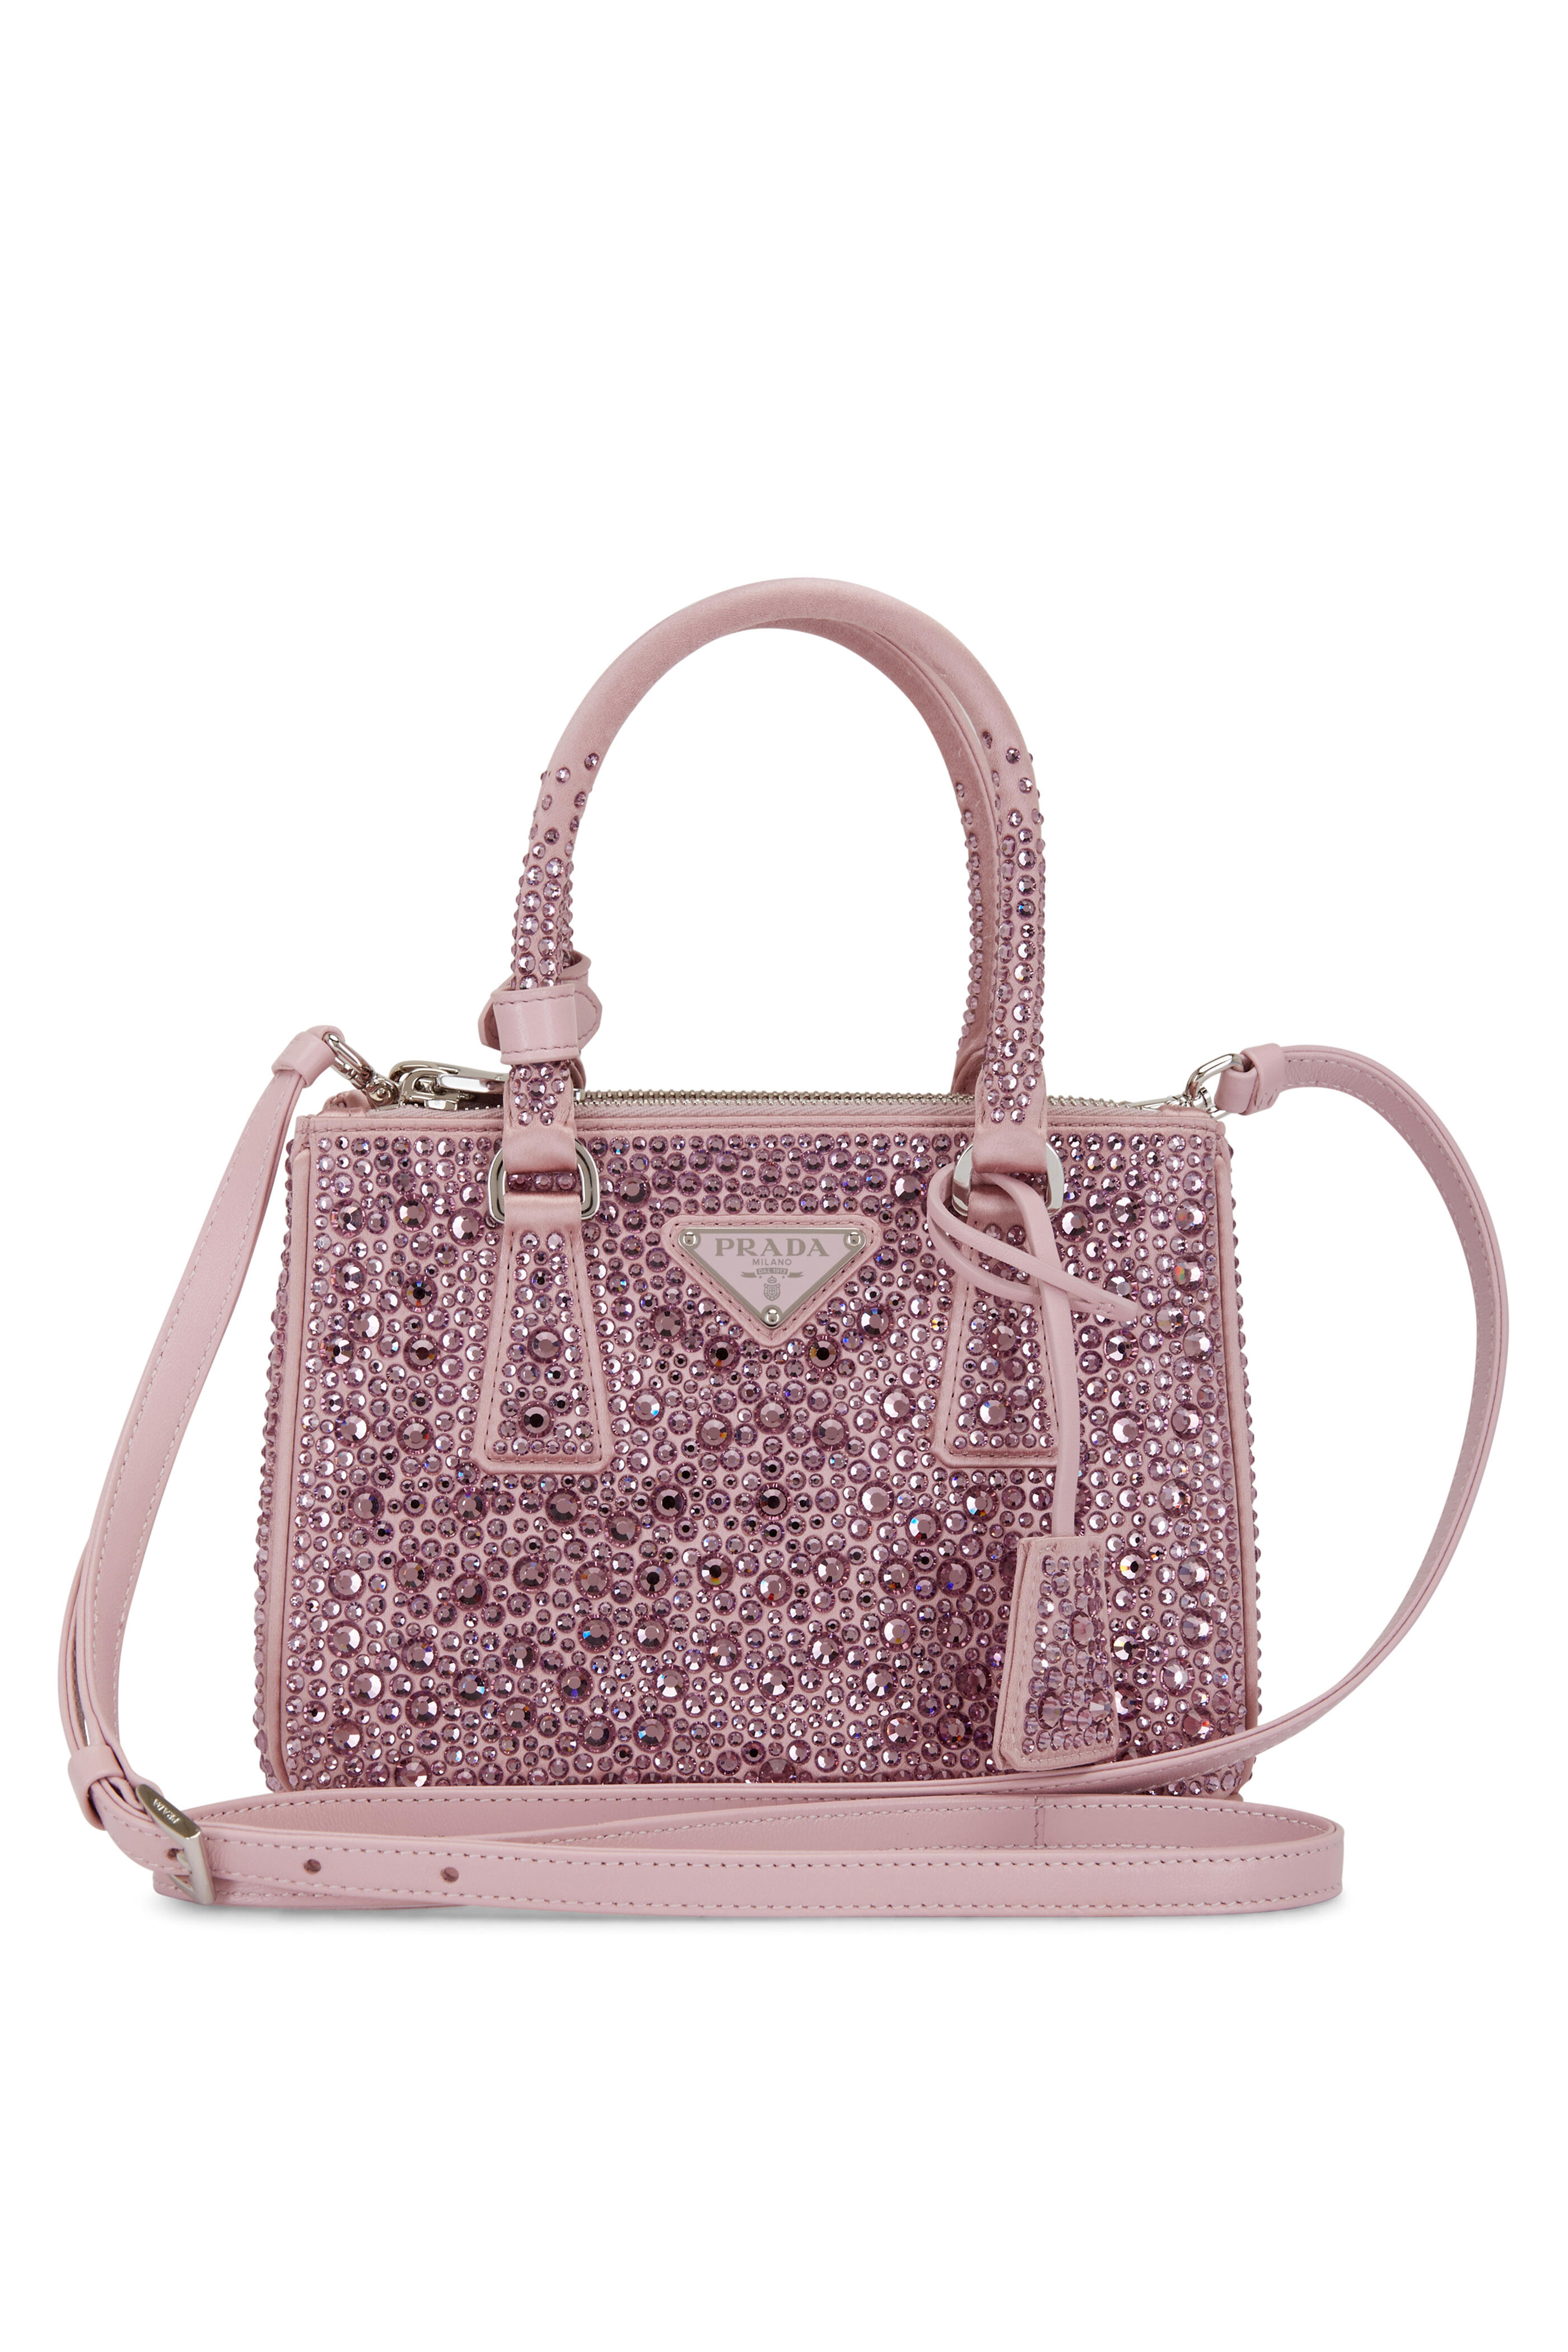 The Ultimate Prada Crystal Bag Review -Everything To Know About